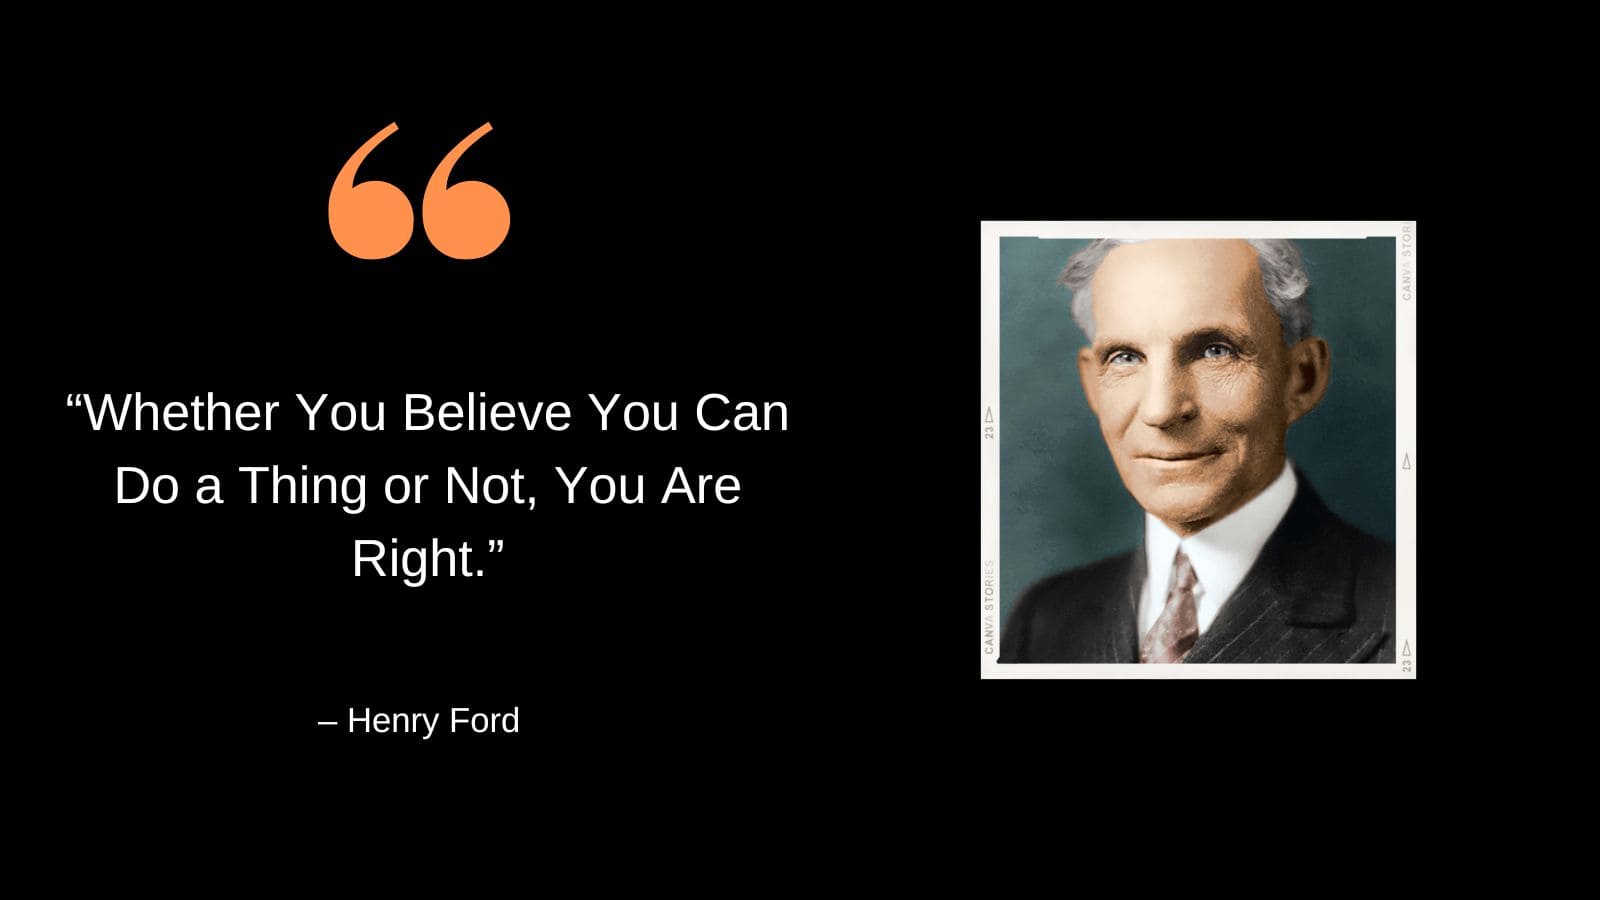 100+Best Famous Henry Ford Quotes About Workers,Success,Cars,Money ...